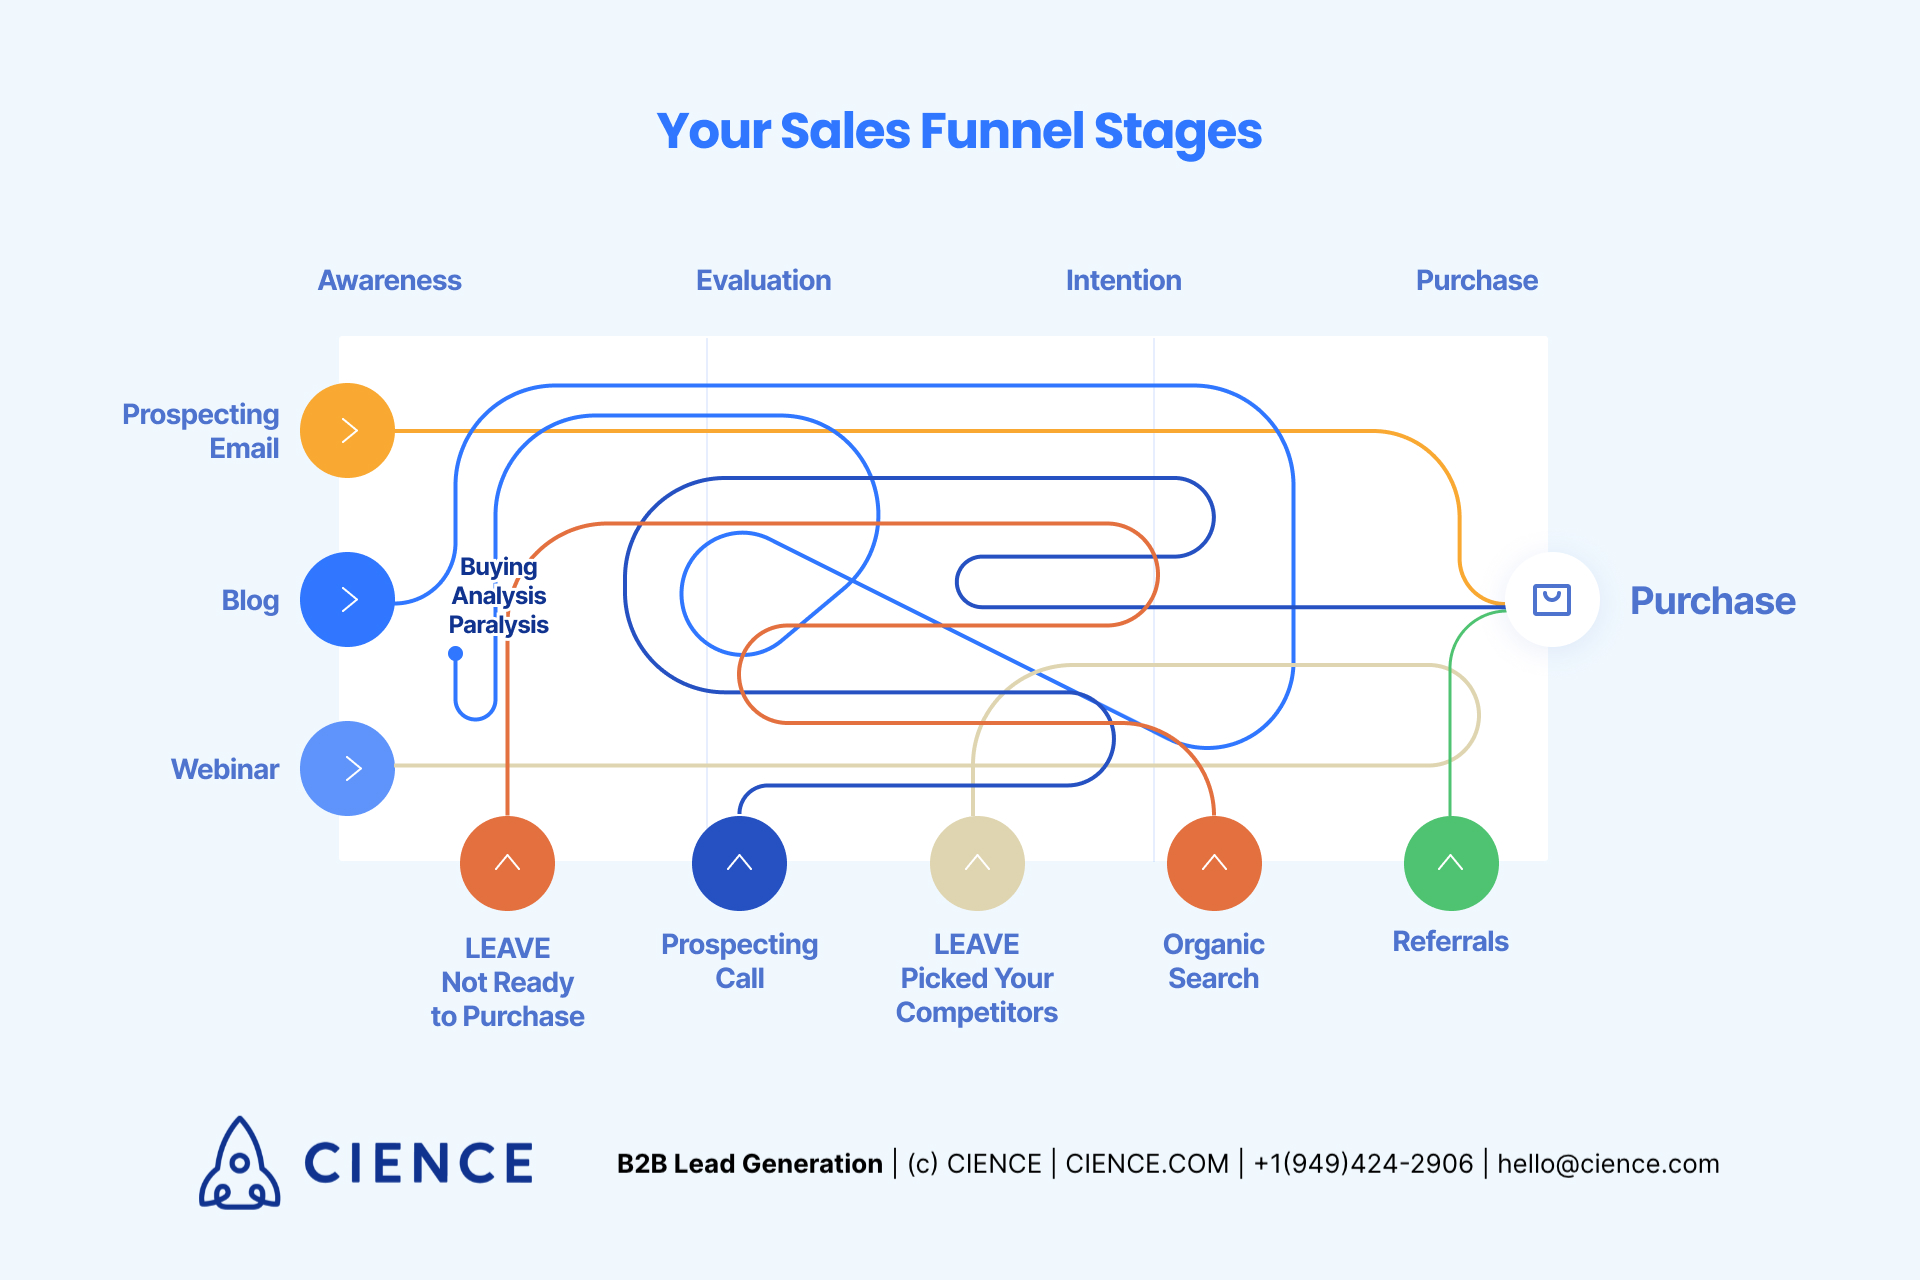 Stages of Sales Funnel